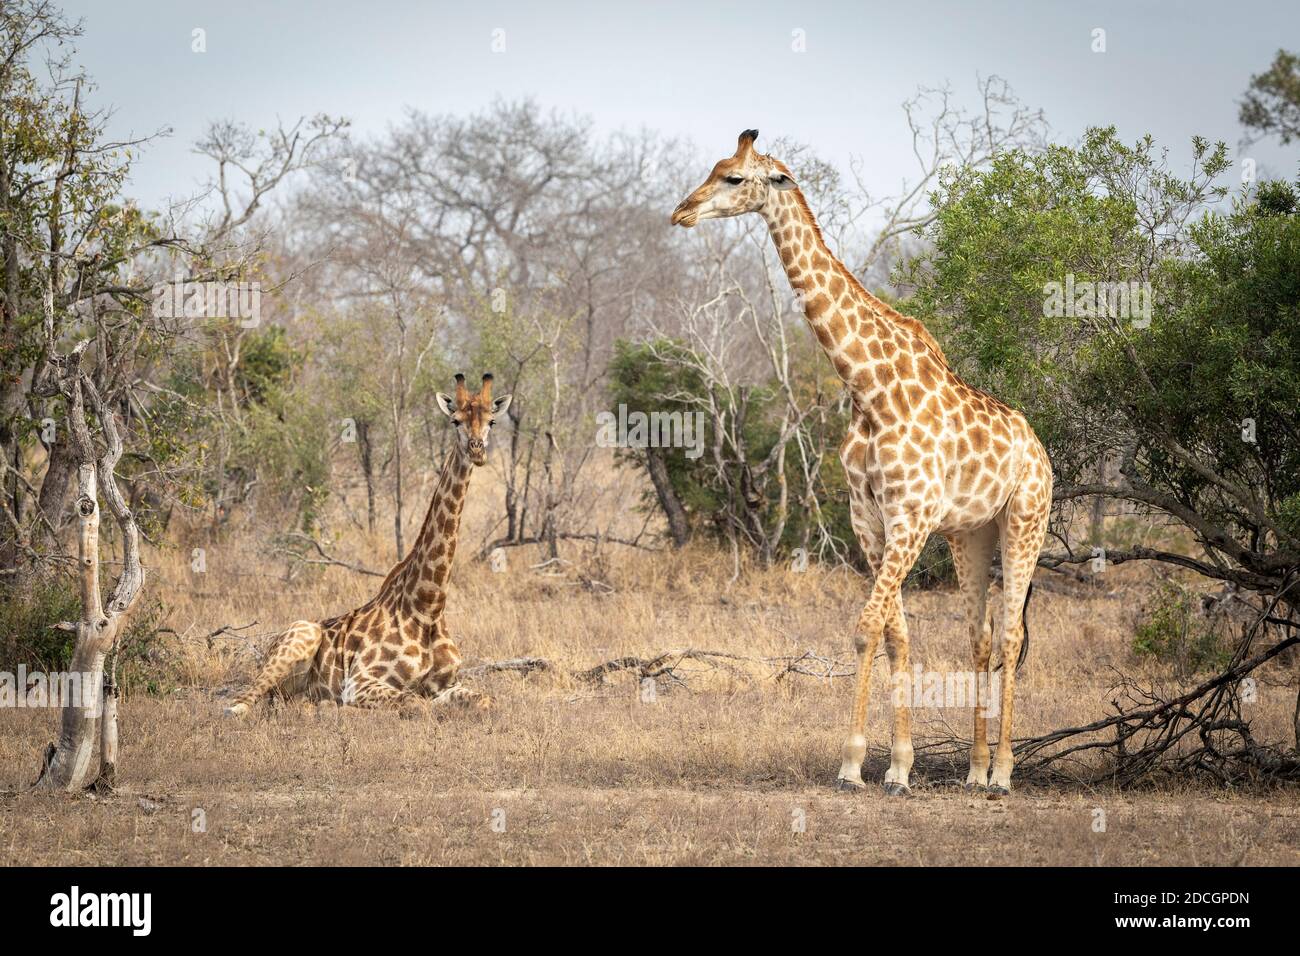 One giraffe standing and the other lying down in dry bush in Kruger Park in South Africa Stock Photo